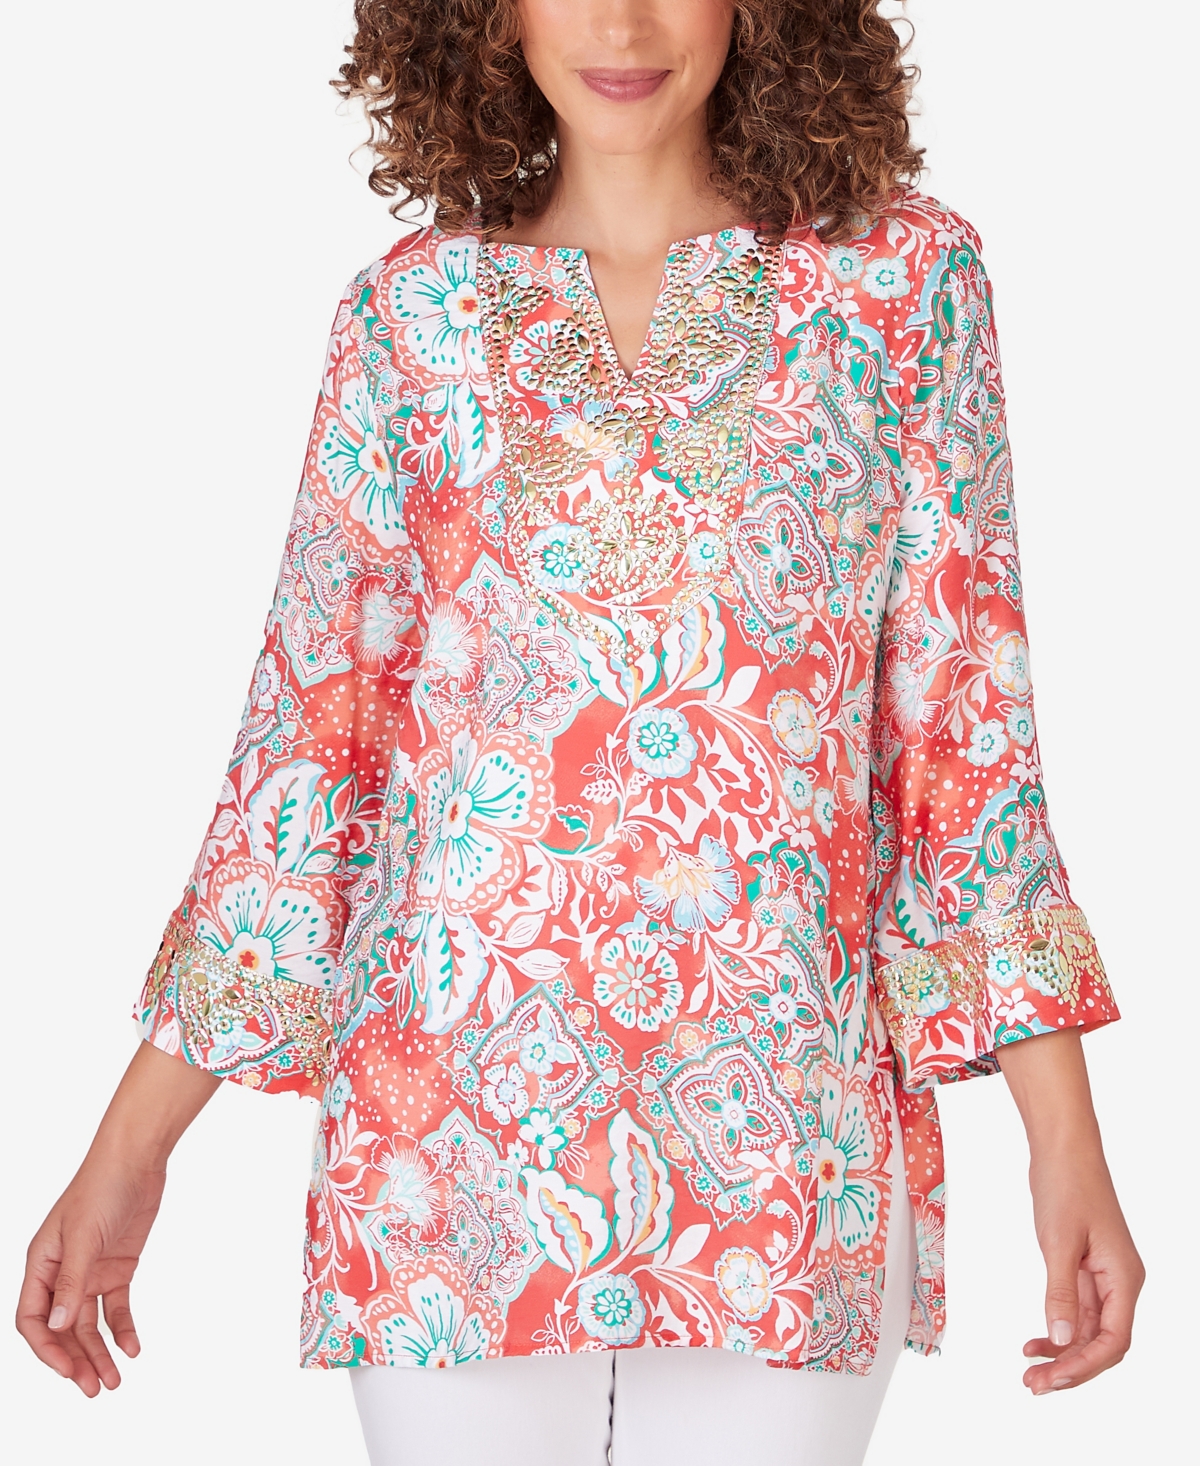 Petite Silky Floral Voile Top - Punch Multi